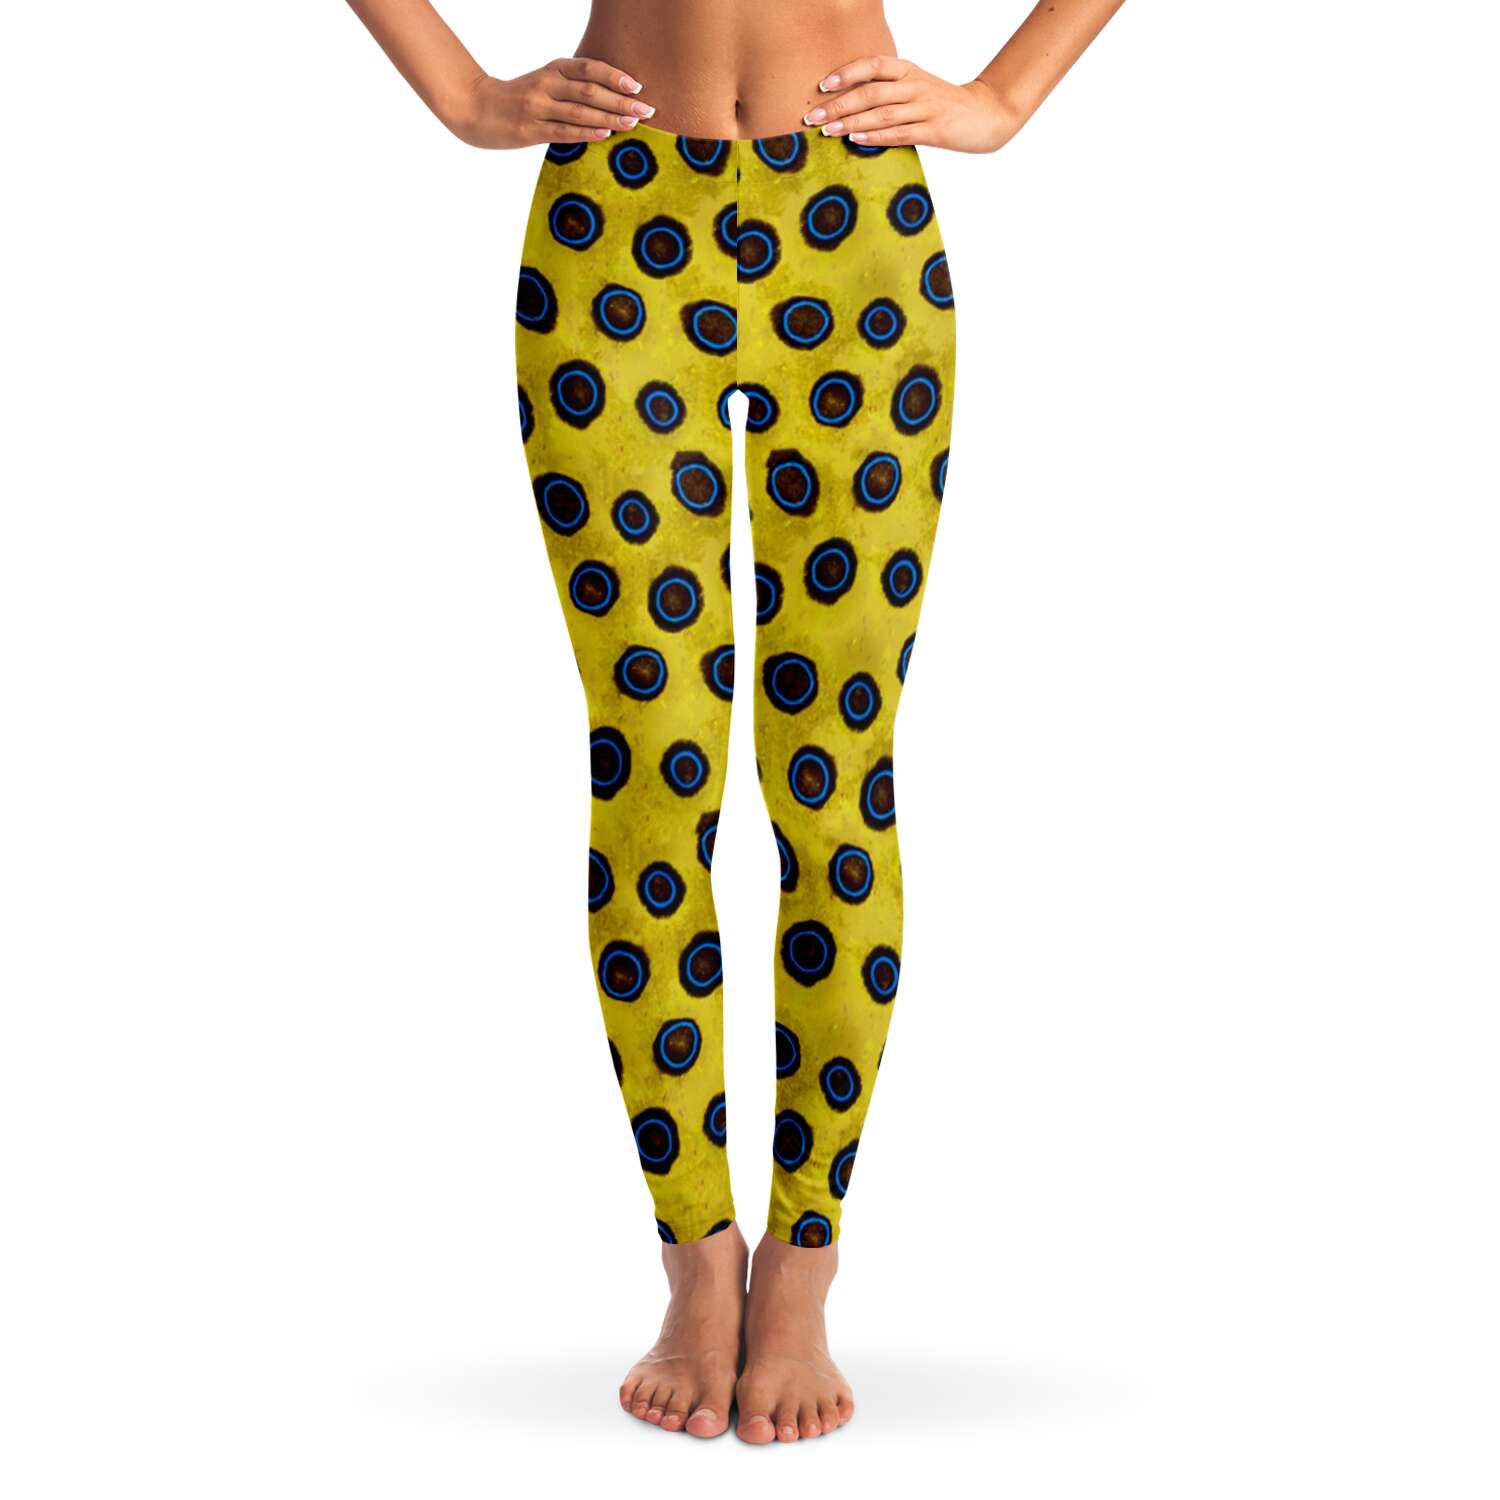 Front view on model of blue-ringed octopus leggings / skins for scuba divers and yoga